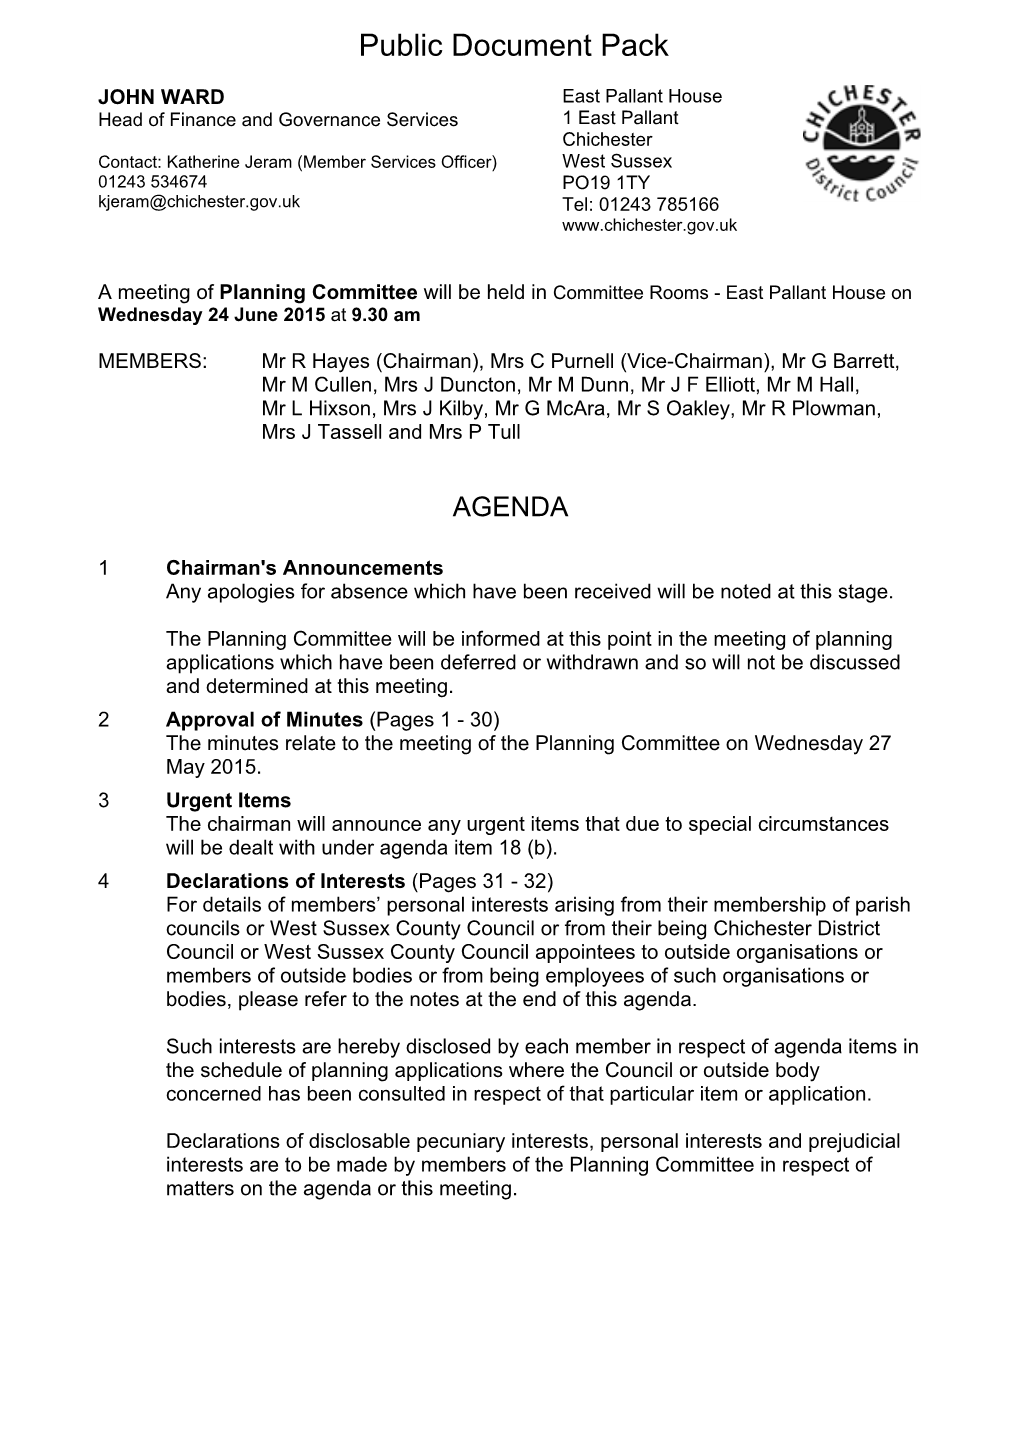 (Public Pack)Agenda Document for Planning Committee, 24/06/2015